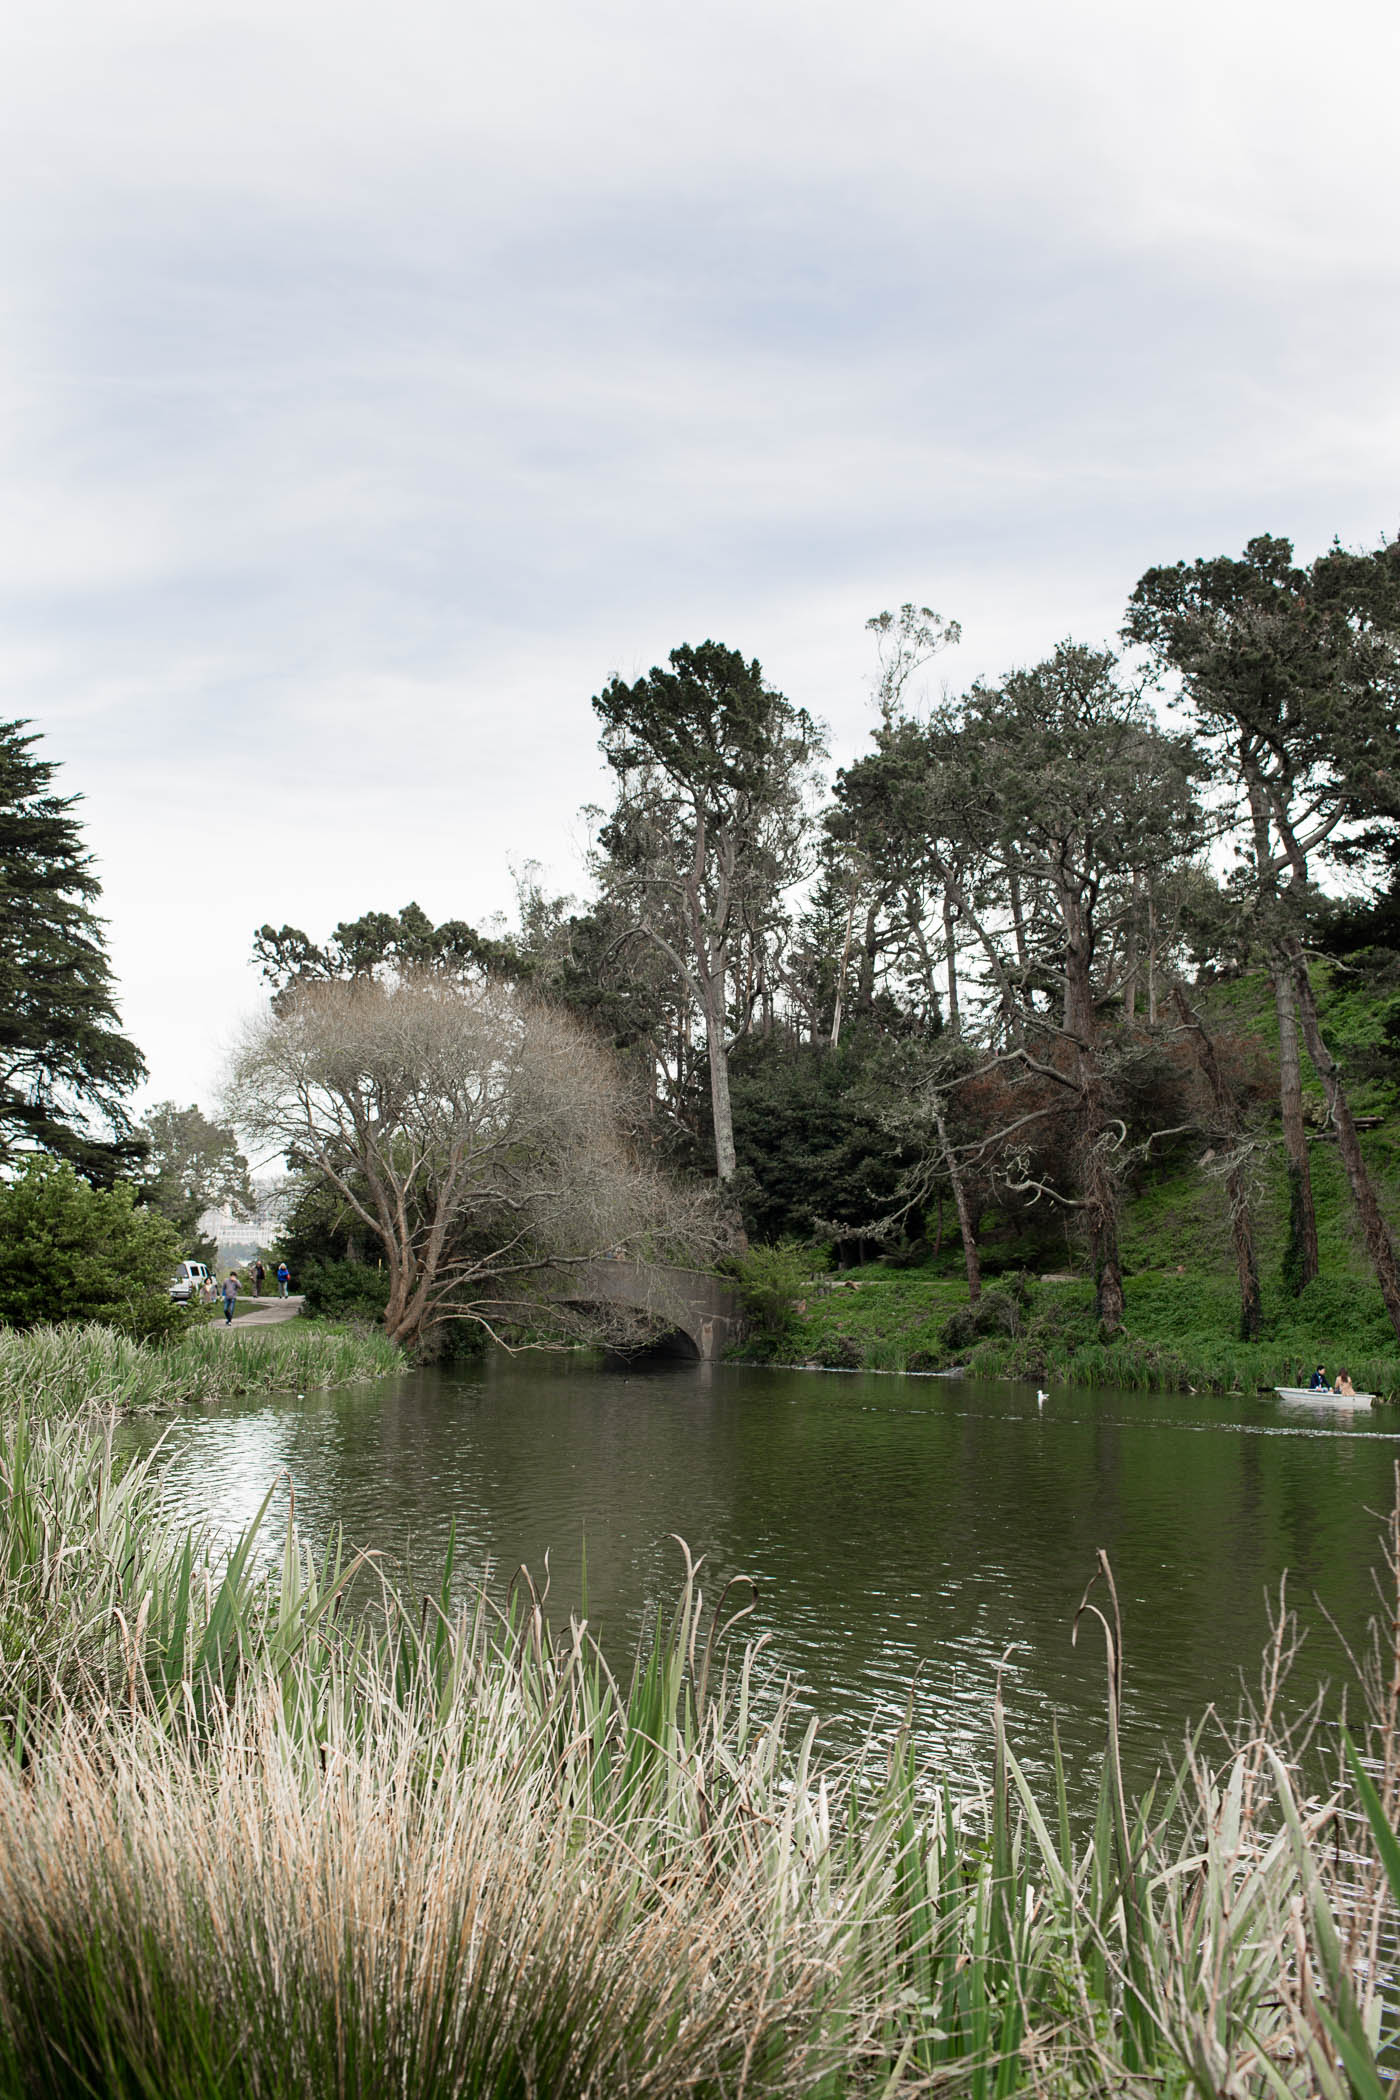 Stow Lake Boathouse and Pedal Boats in Golden Gate Park